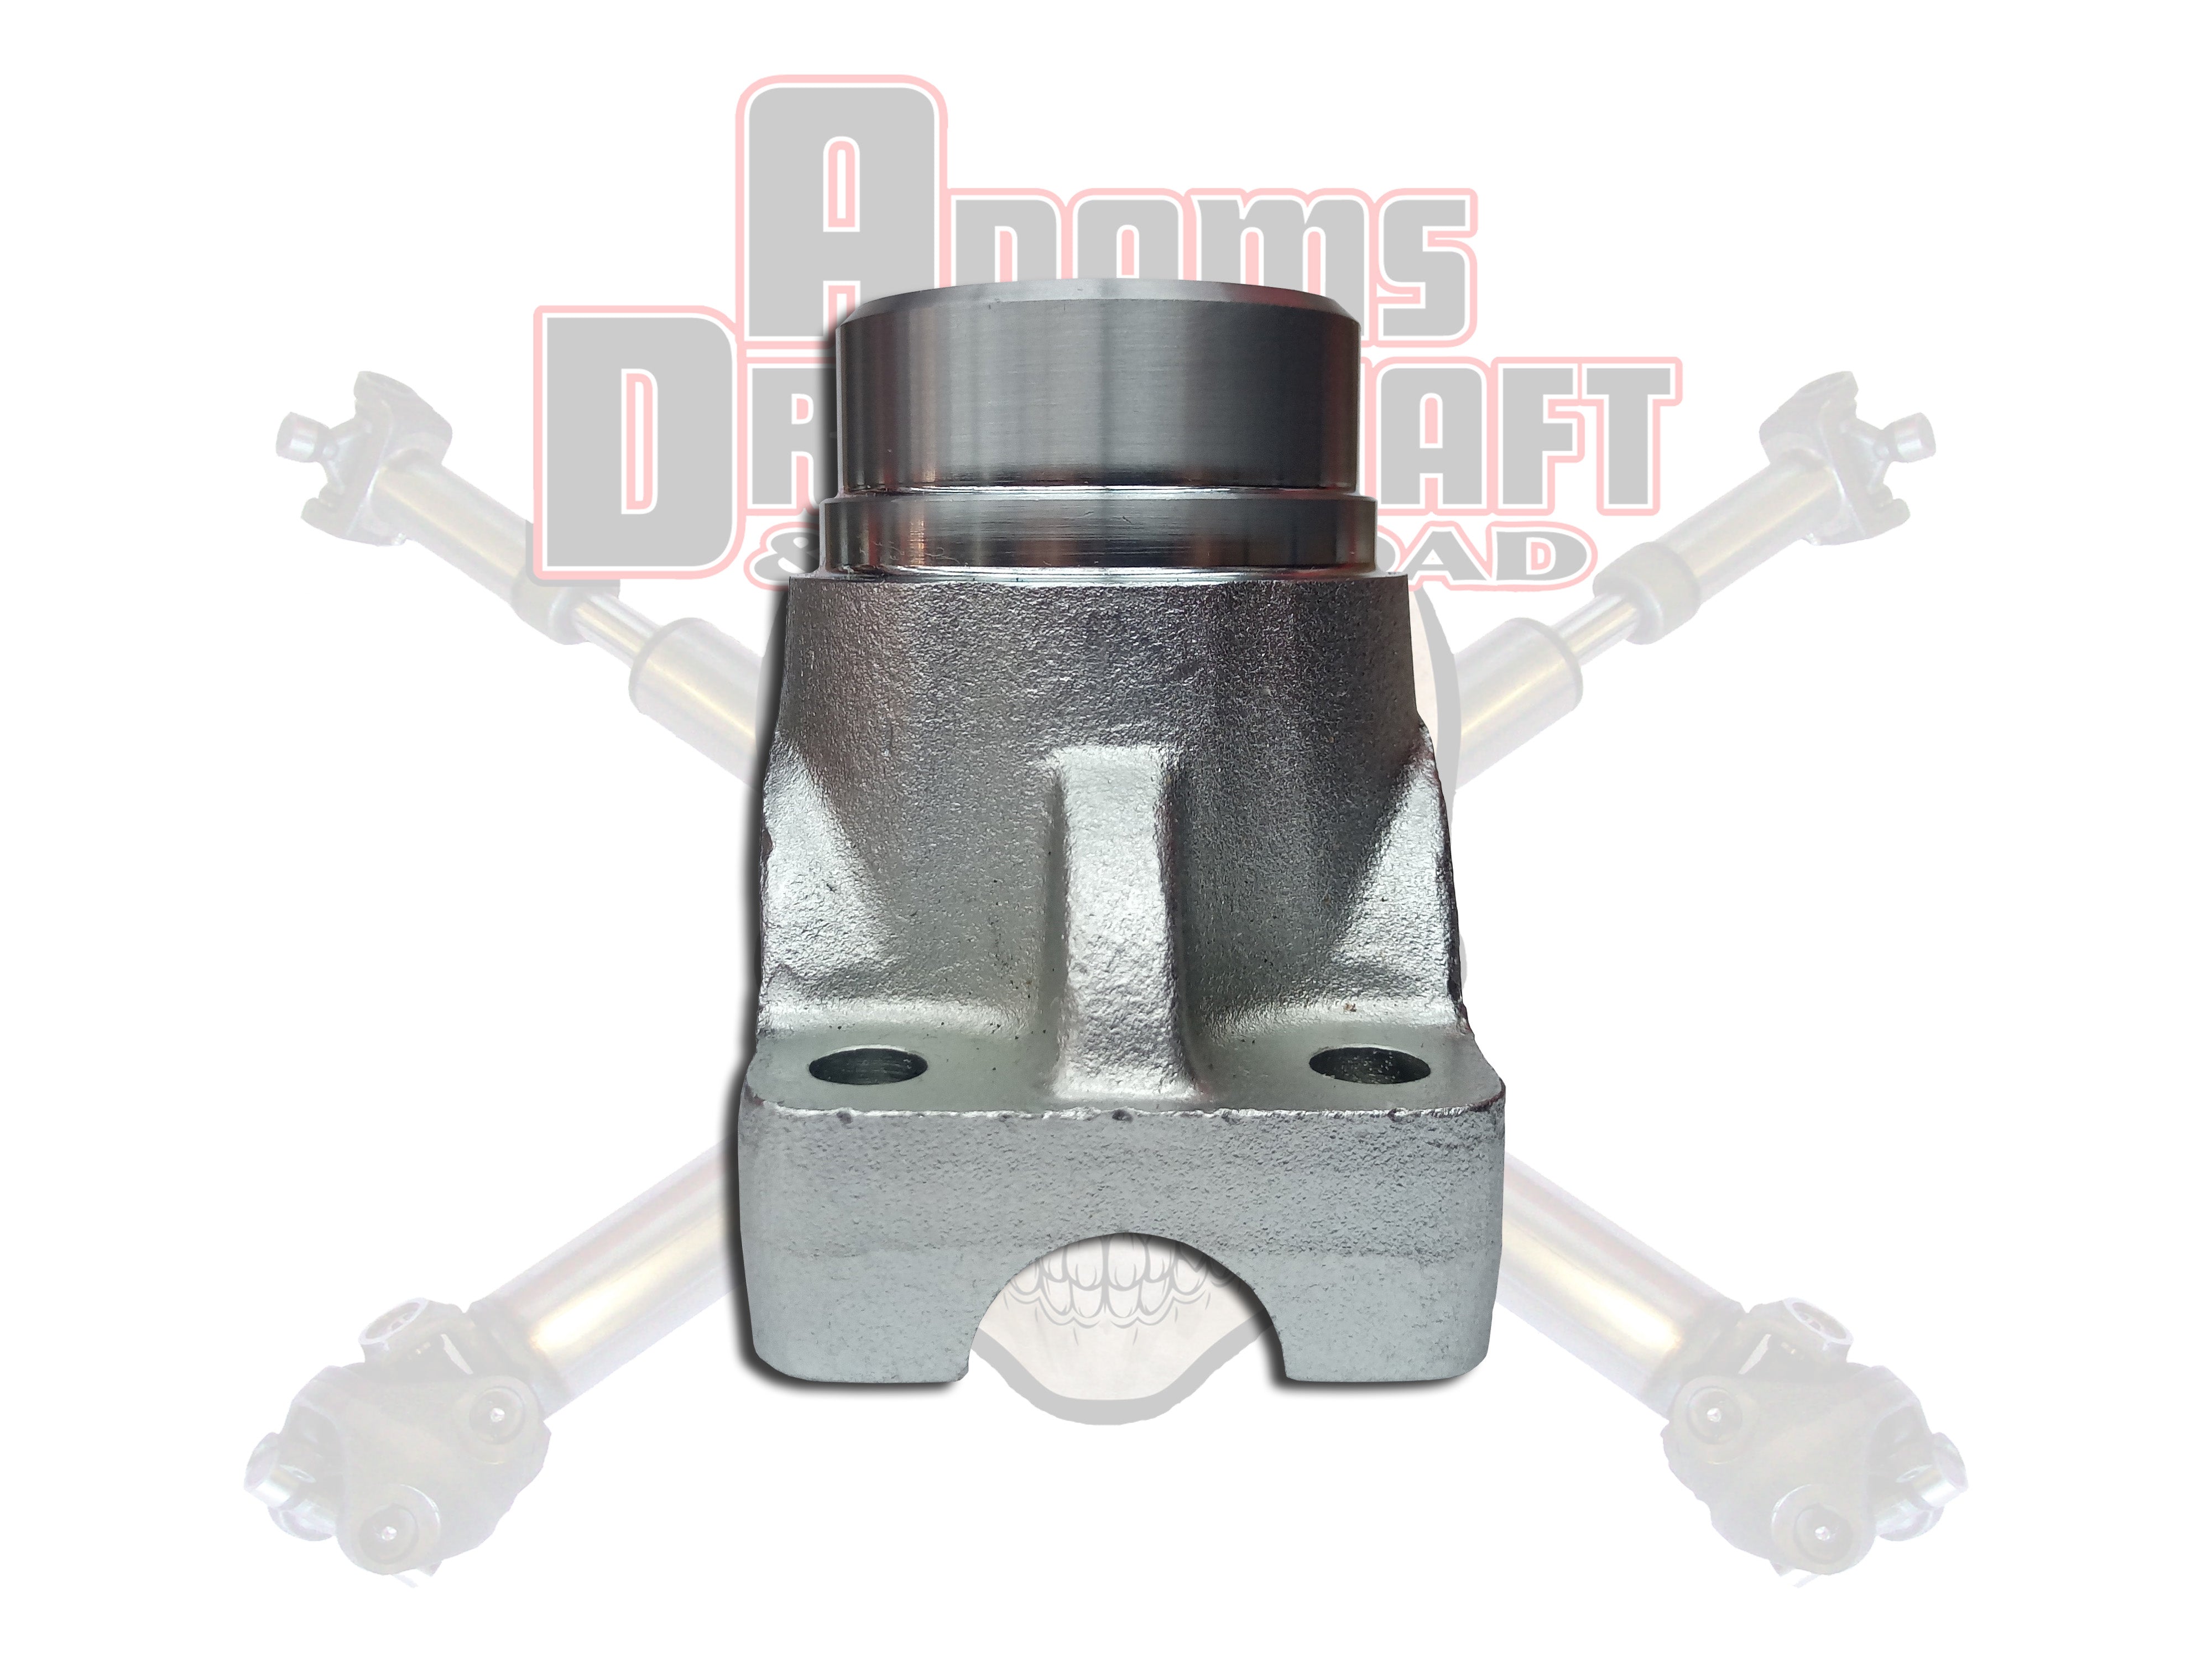 Adams Forged Jeep JL Sport Rear 1350 Series Pinion Yoke U-Bolt Style with an M220 Differential.